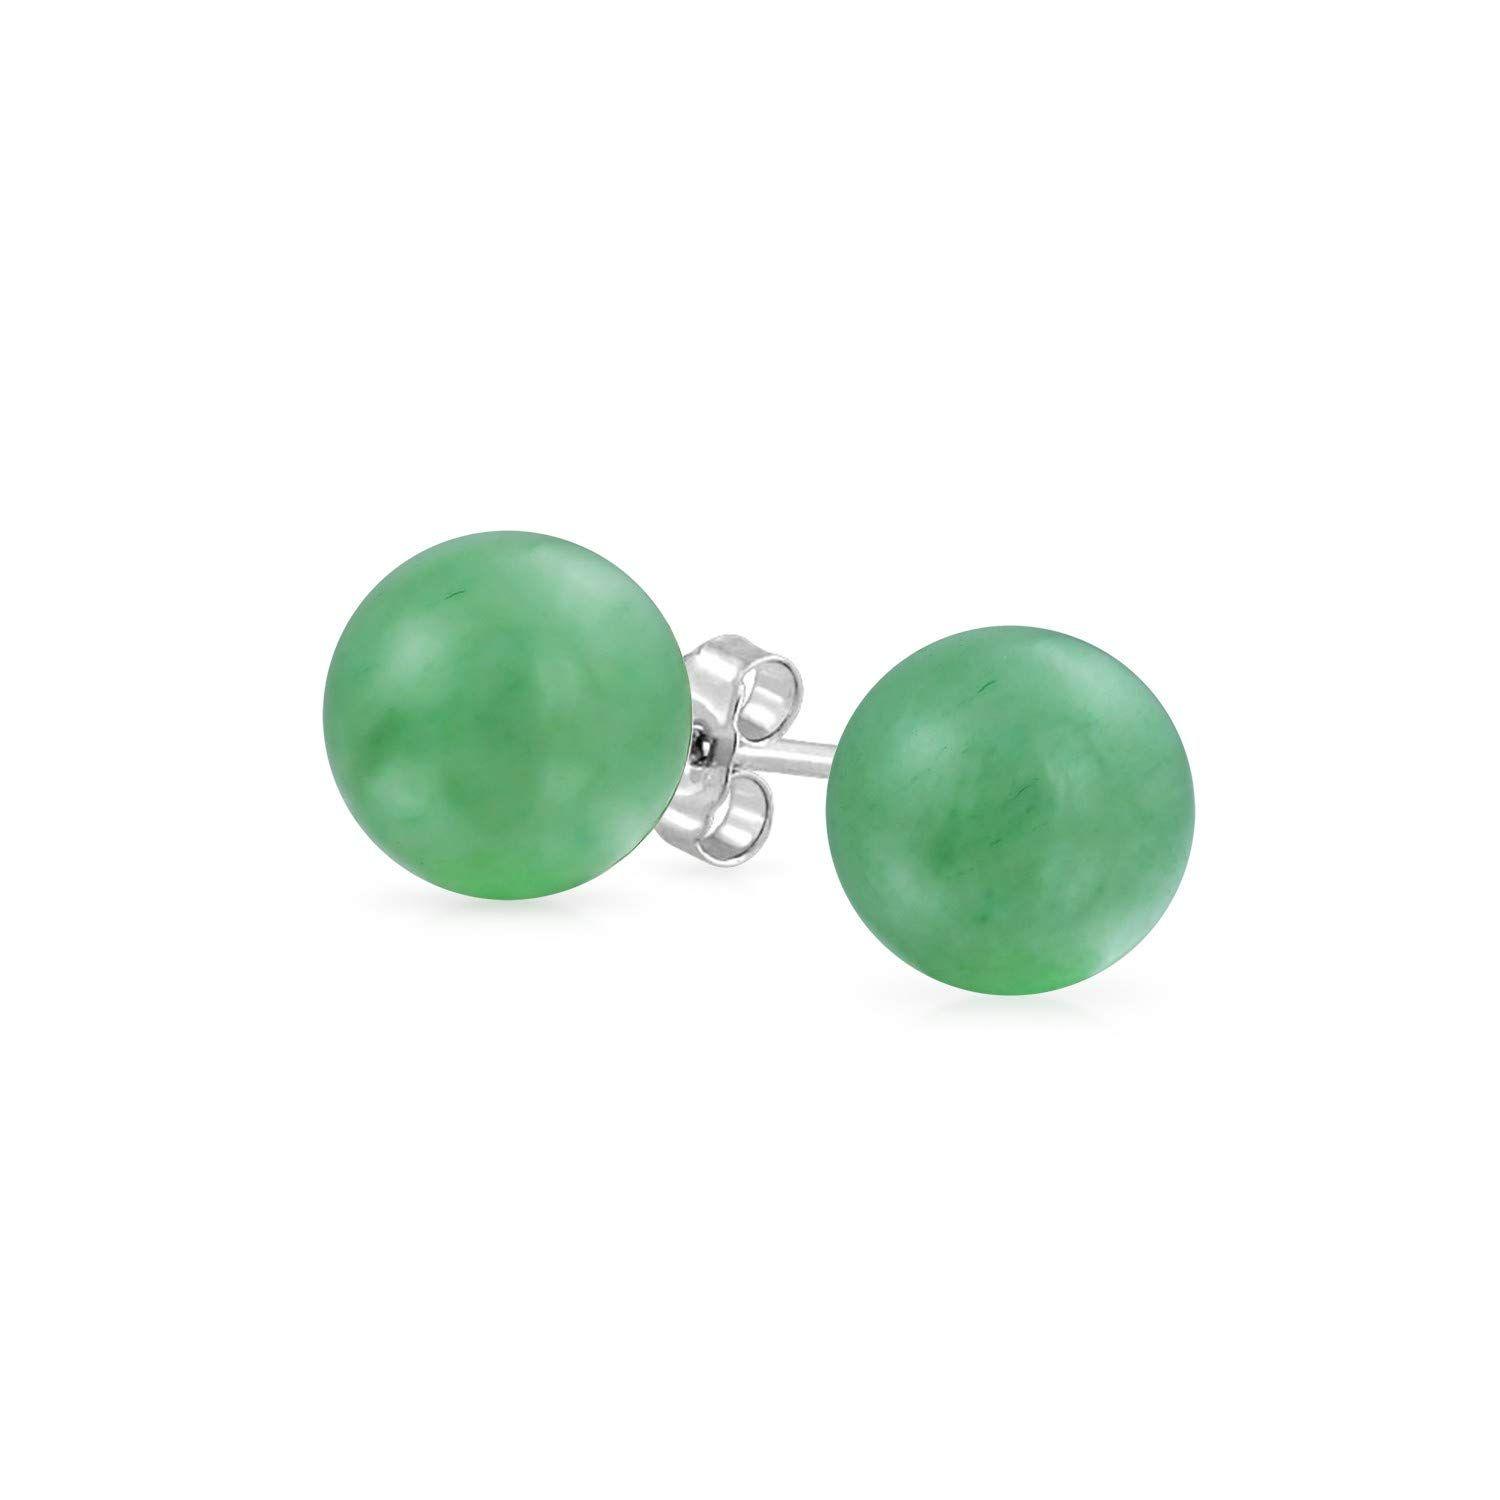 Green Circle with Silver Ball Logo - Tisoro Sterling Silver Green Jade Ball Stud Earrings